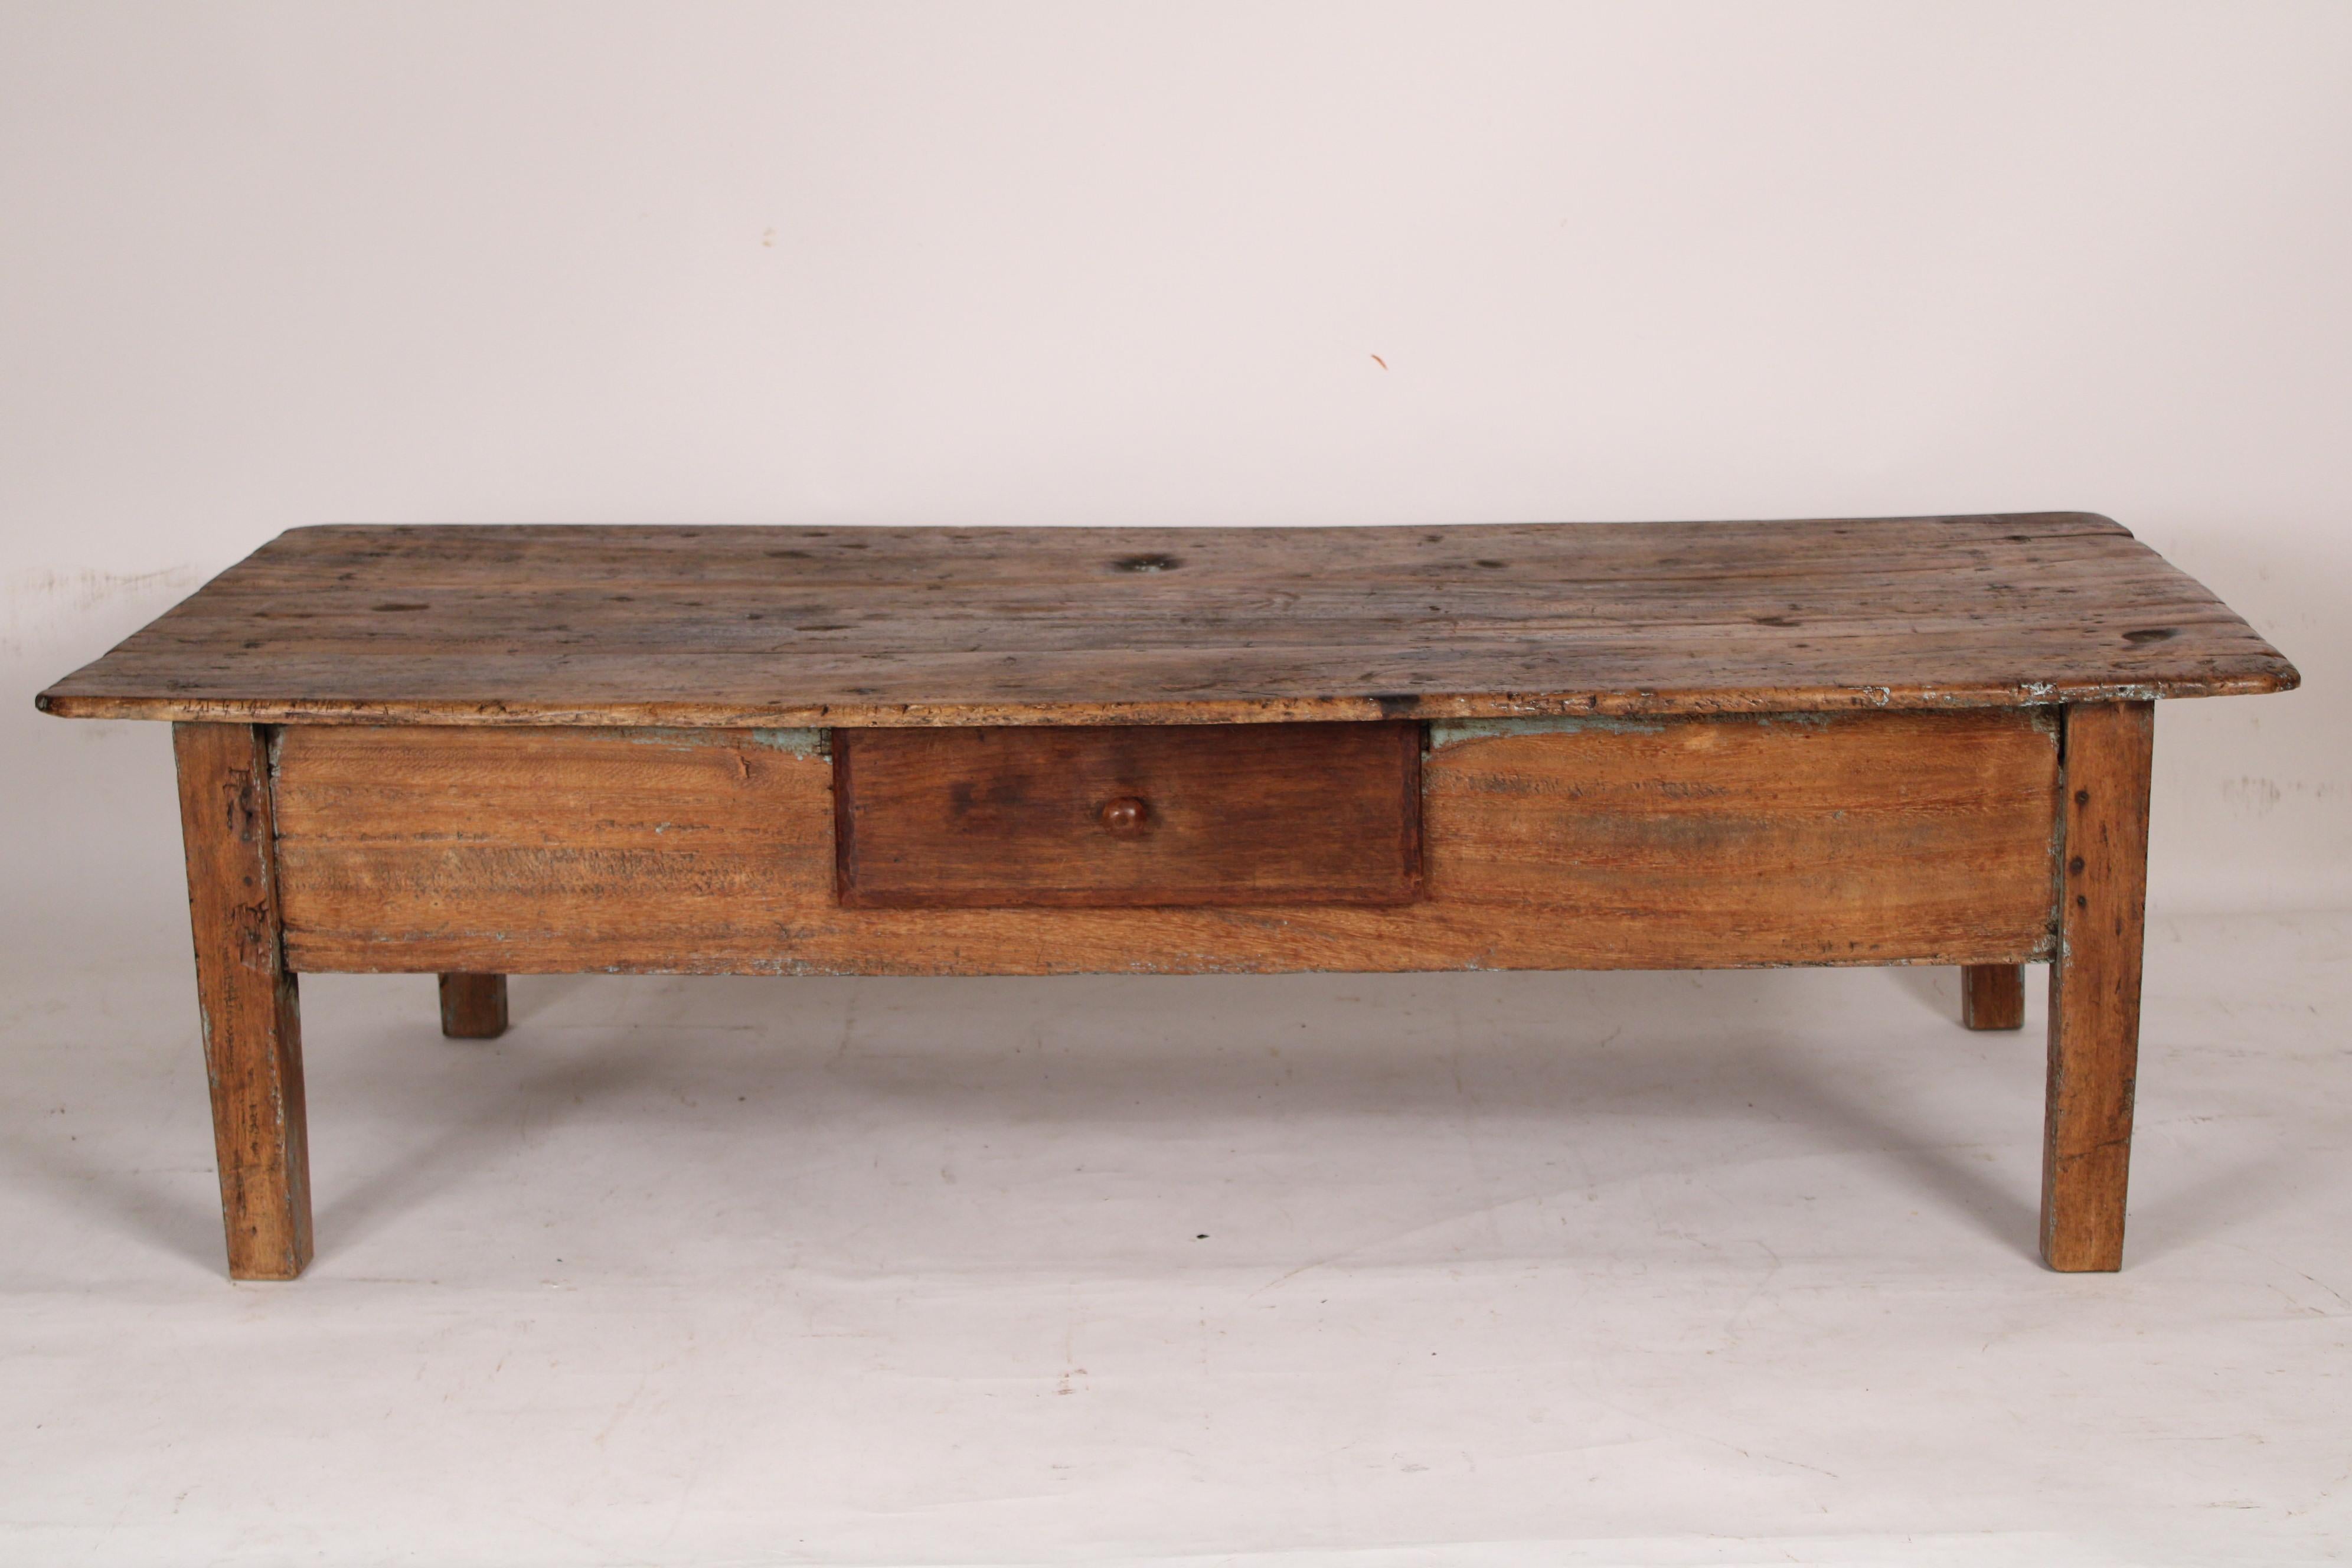 Rustic country coffee table with a drawer and traces of old paint, circa 1900.